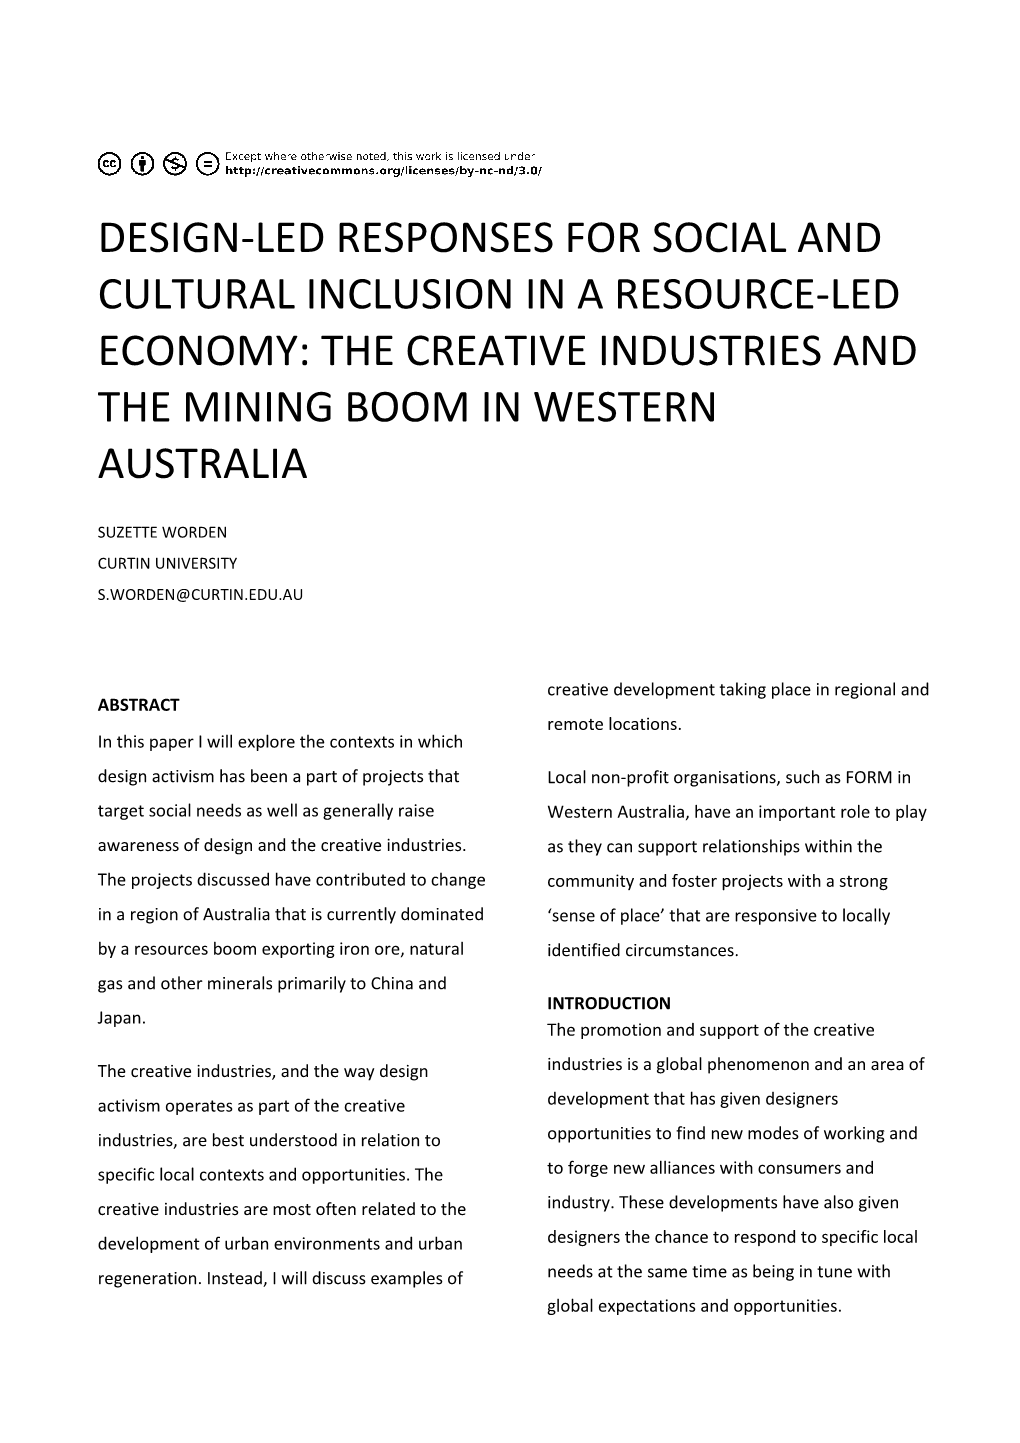 Design-Led Responses for Social and Cultural Inclusion in a Resource-Led Economy: the Creative Industries and the Mining Boom in Western Australia